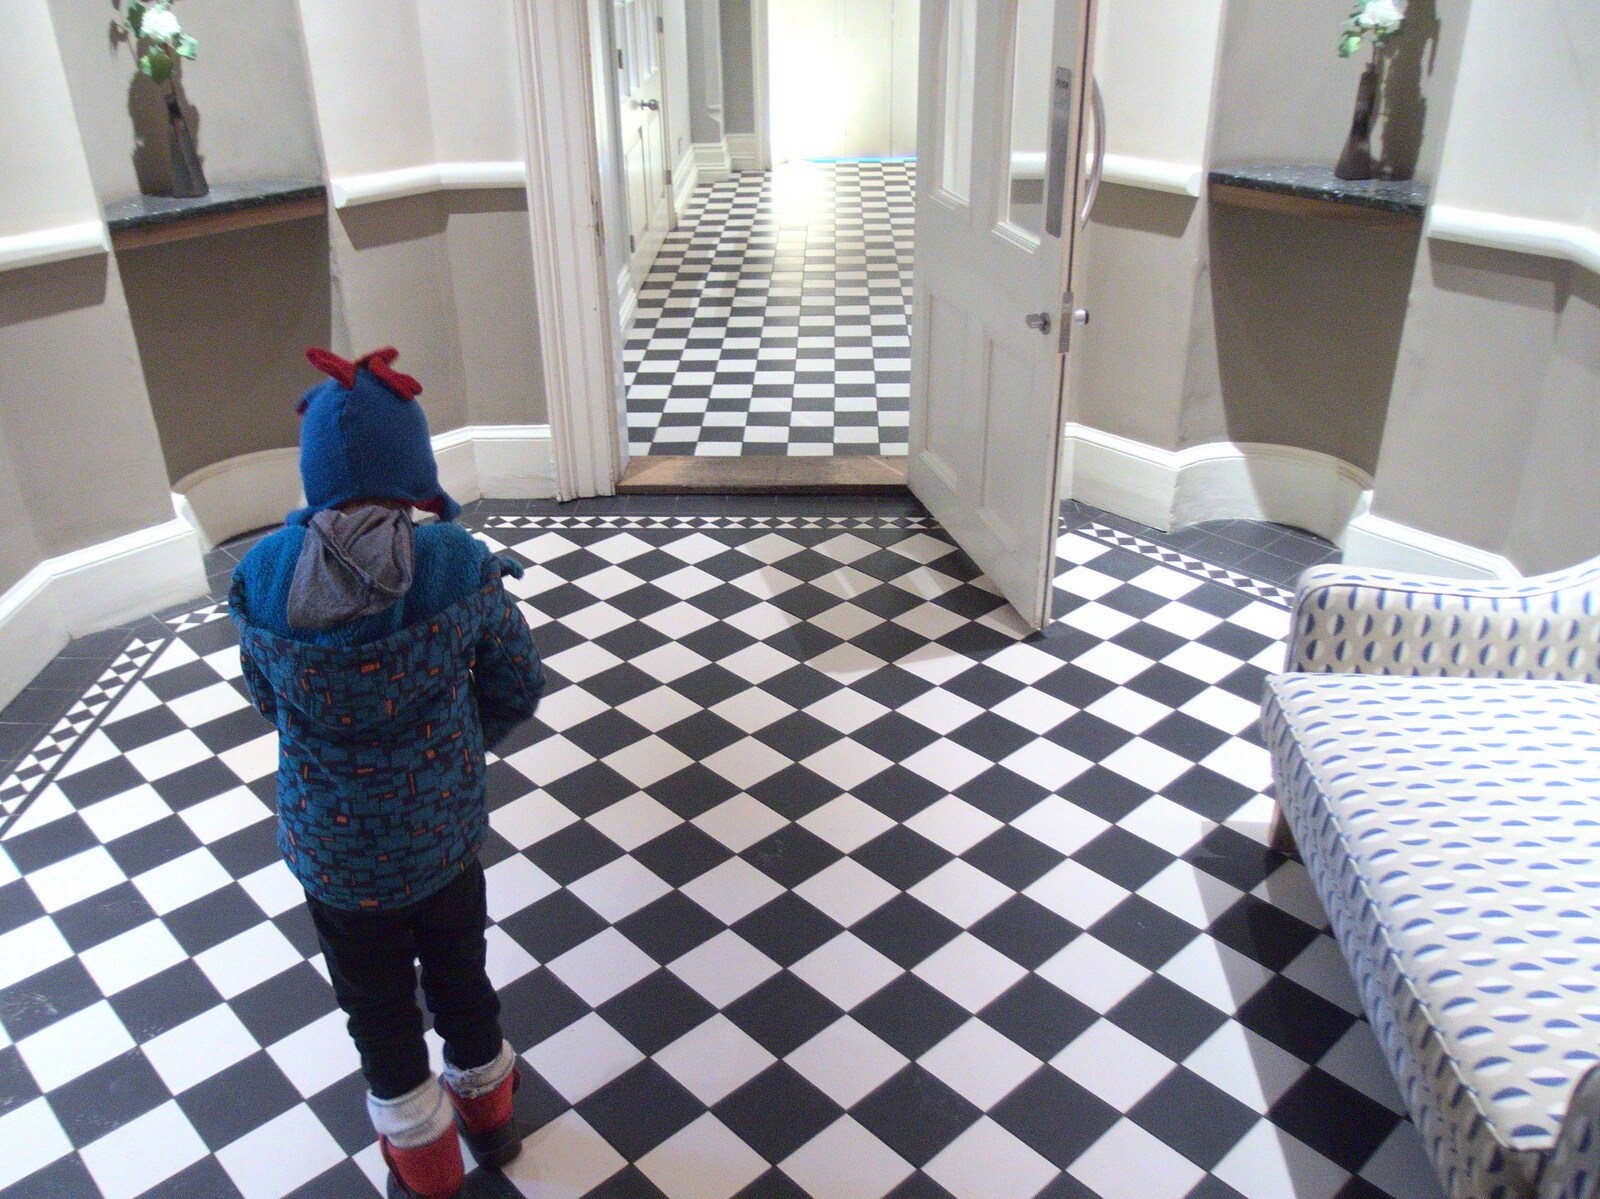 Harry and a chequer-board floor from The End of the Beast (From the East), Brome, Suffolk - 4th March 2018